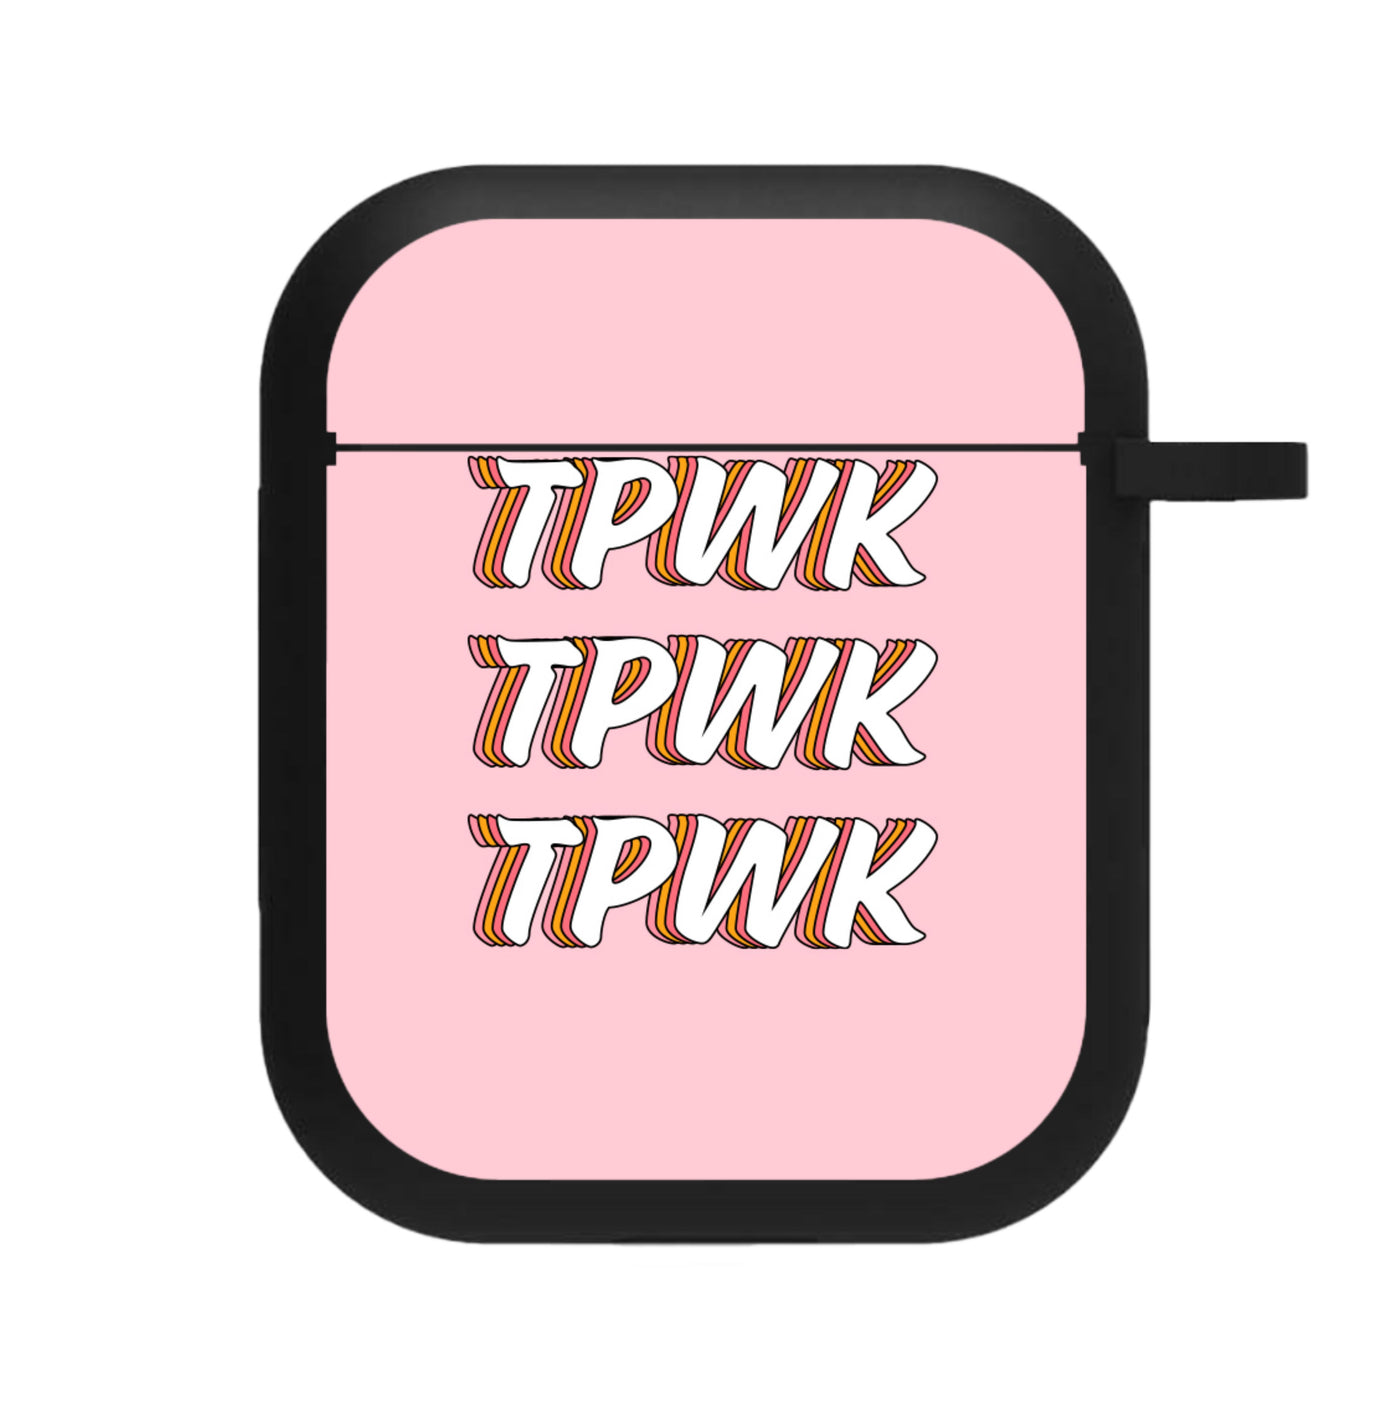 TPWK - Harry AirPods Case